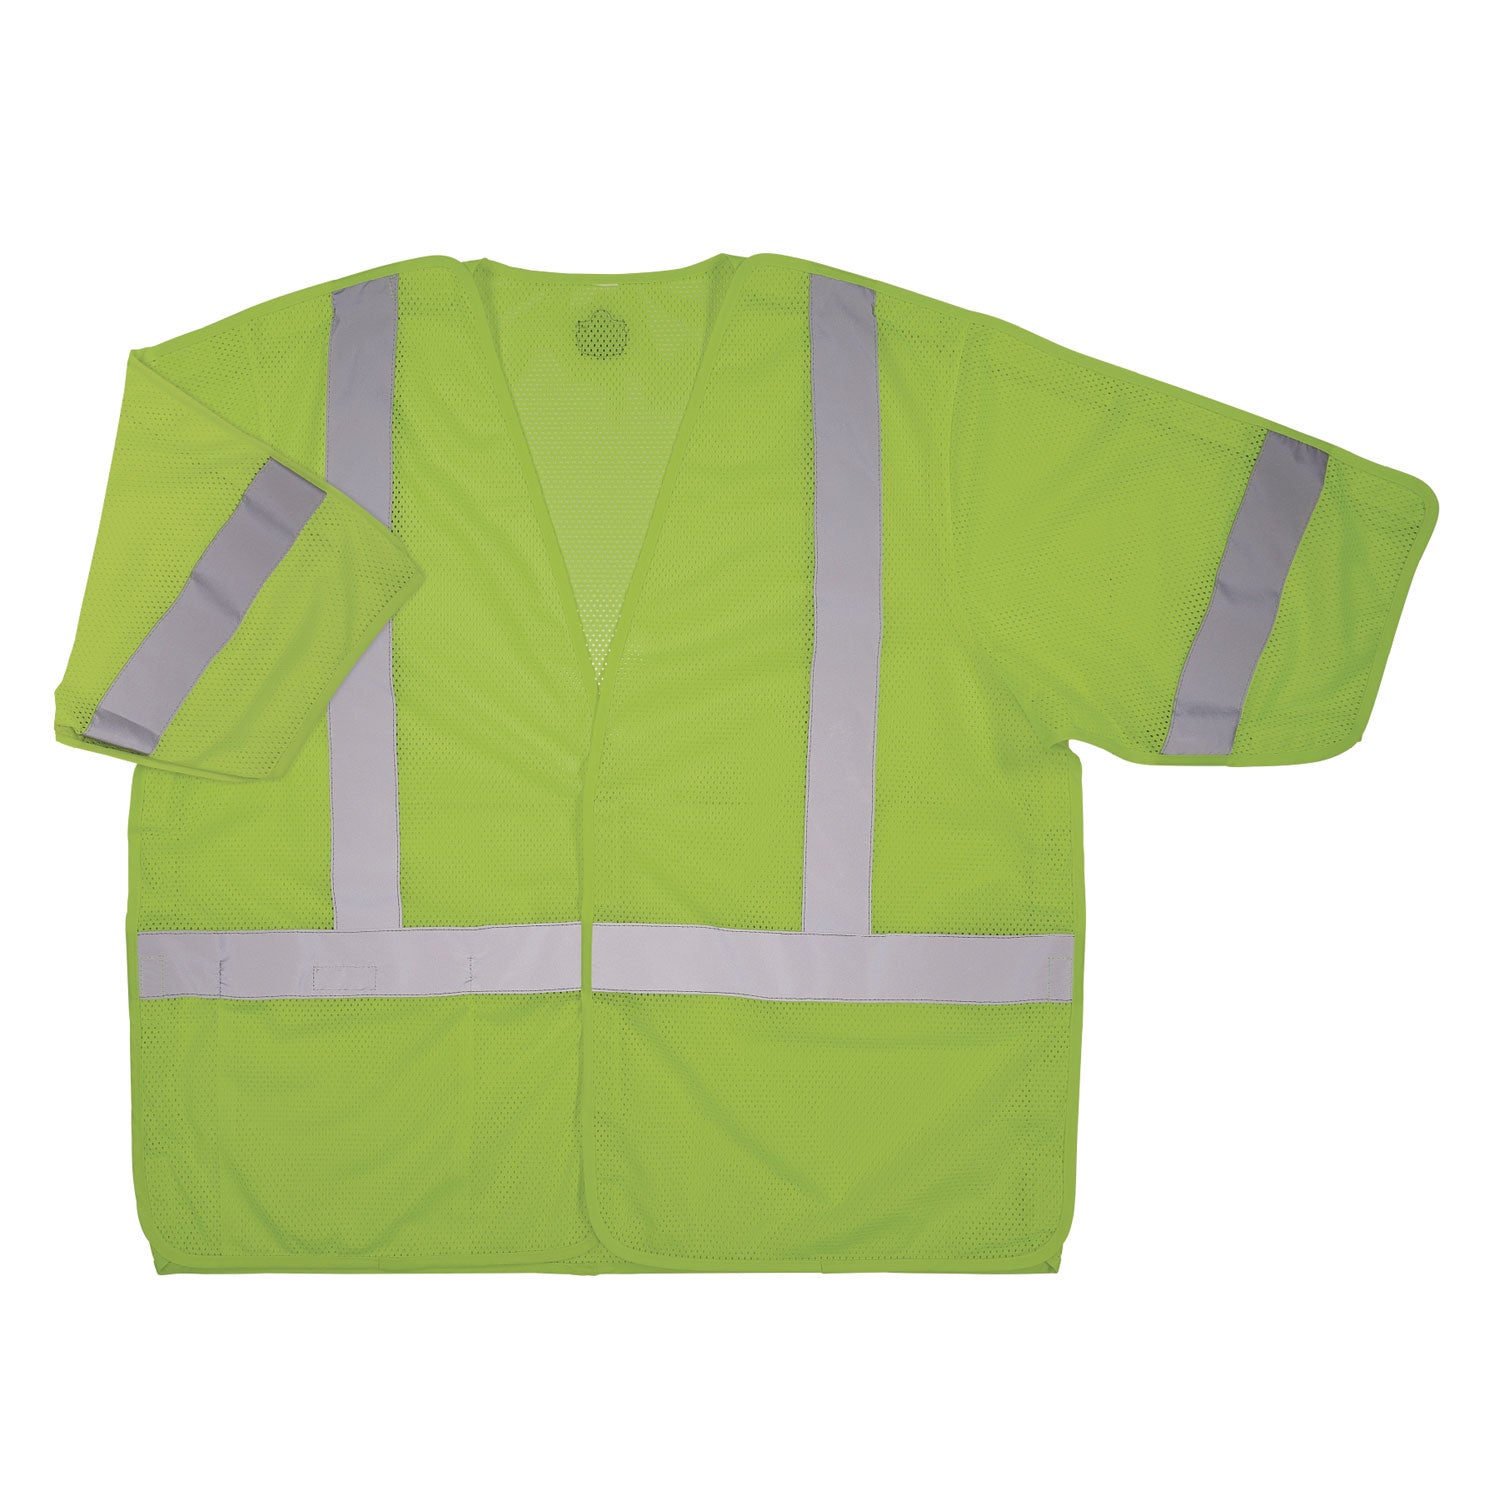 glowear-8315ba-class-3-hi-vis-breakaway-safety-vest-4x-large-to-5x-large-lime-ships-in-1-3-business-days_ego23059 - 1